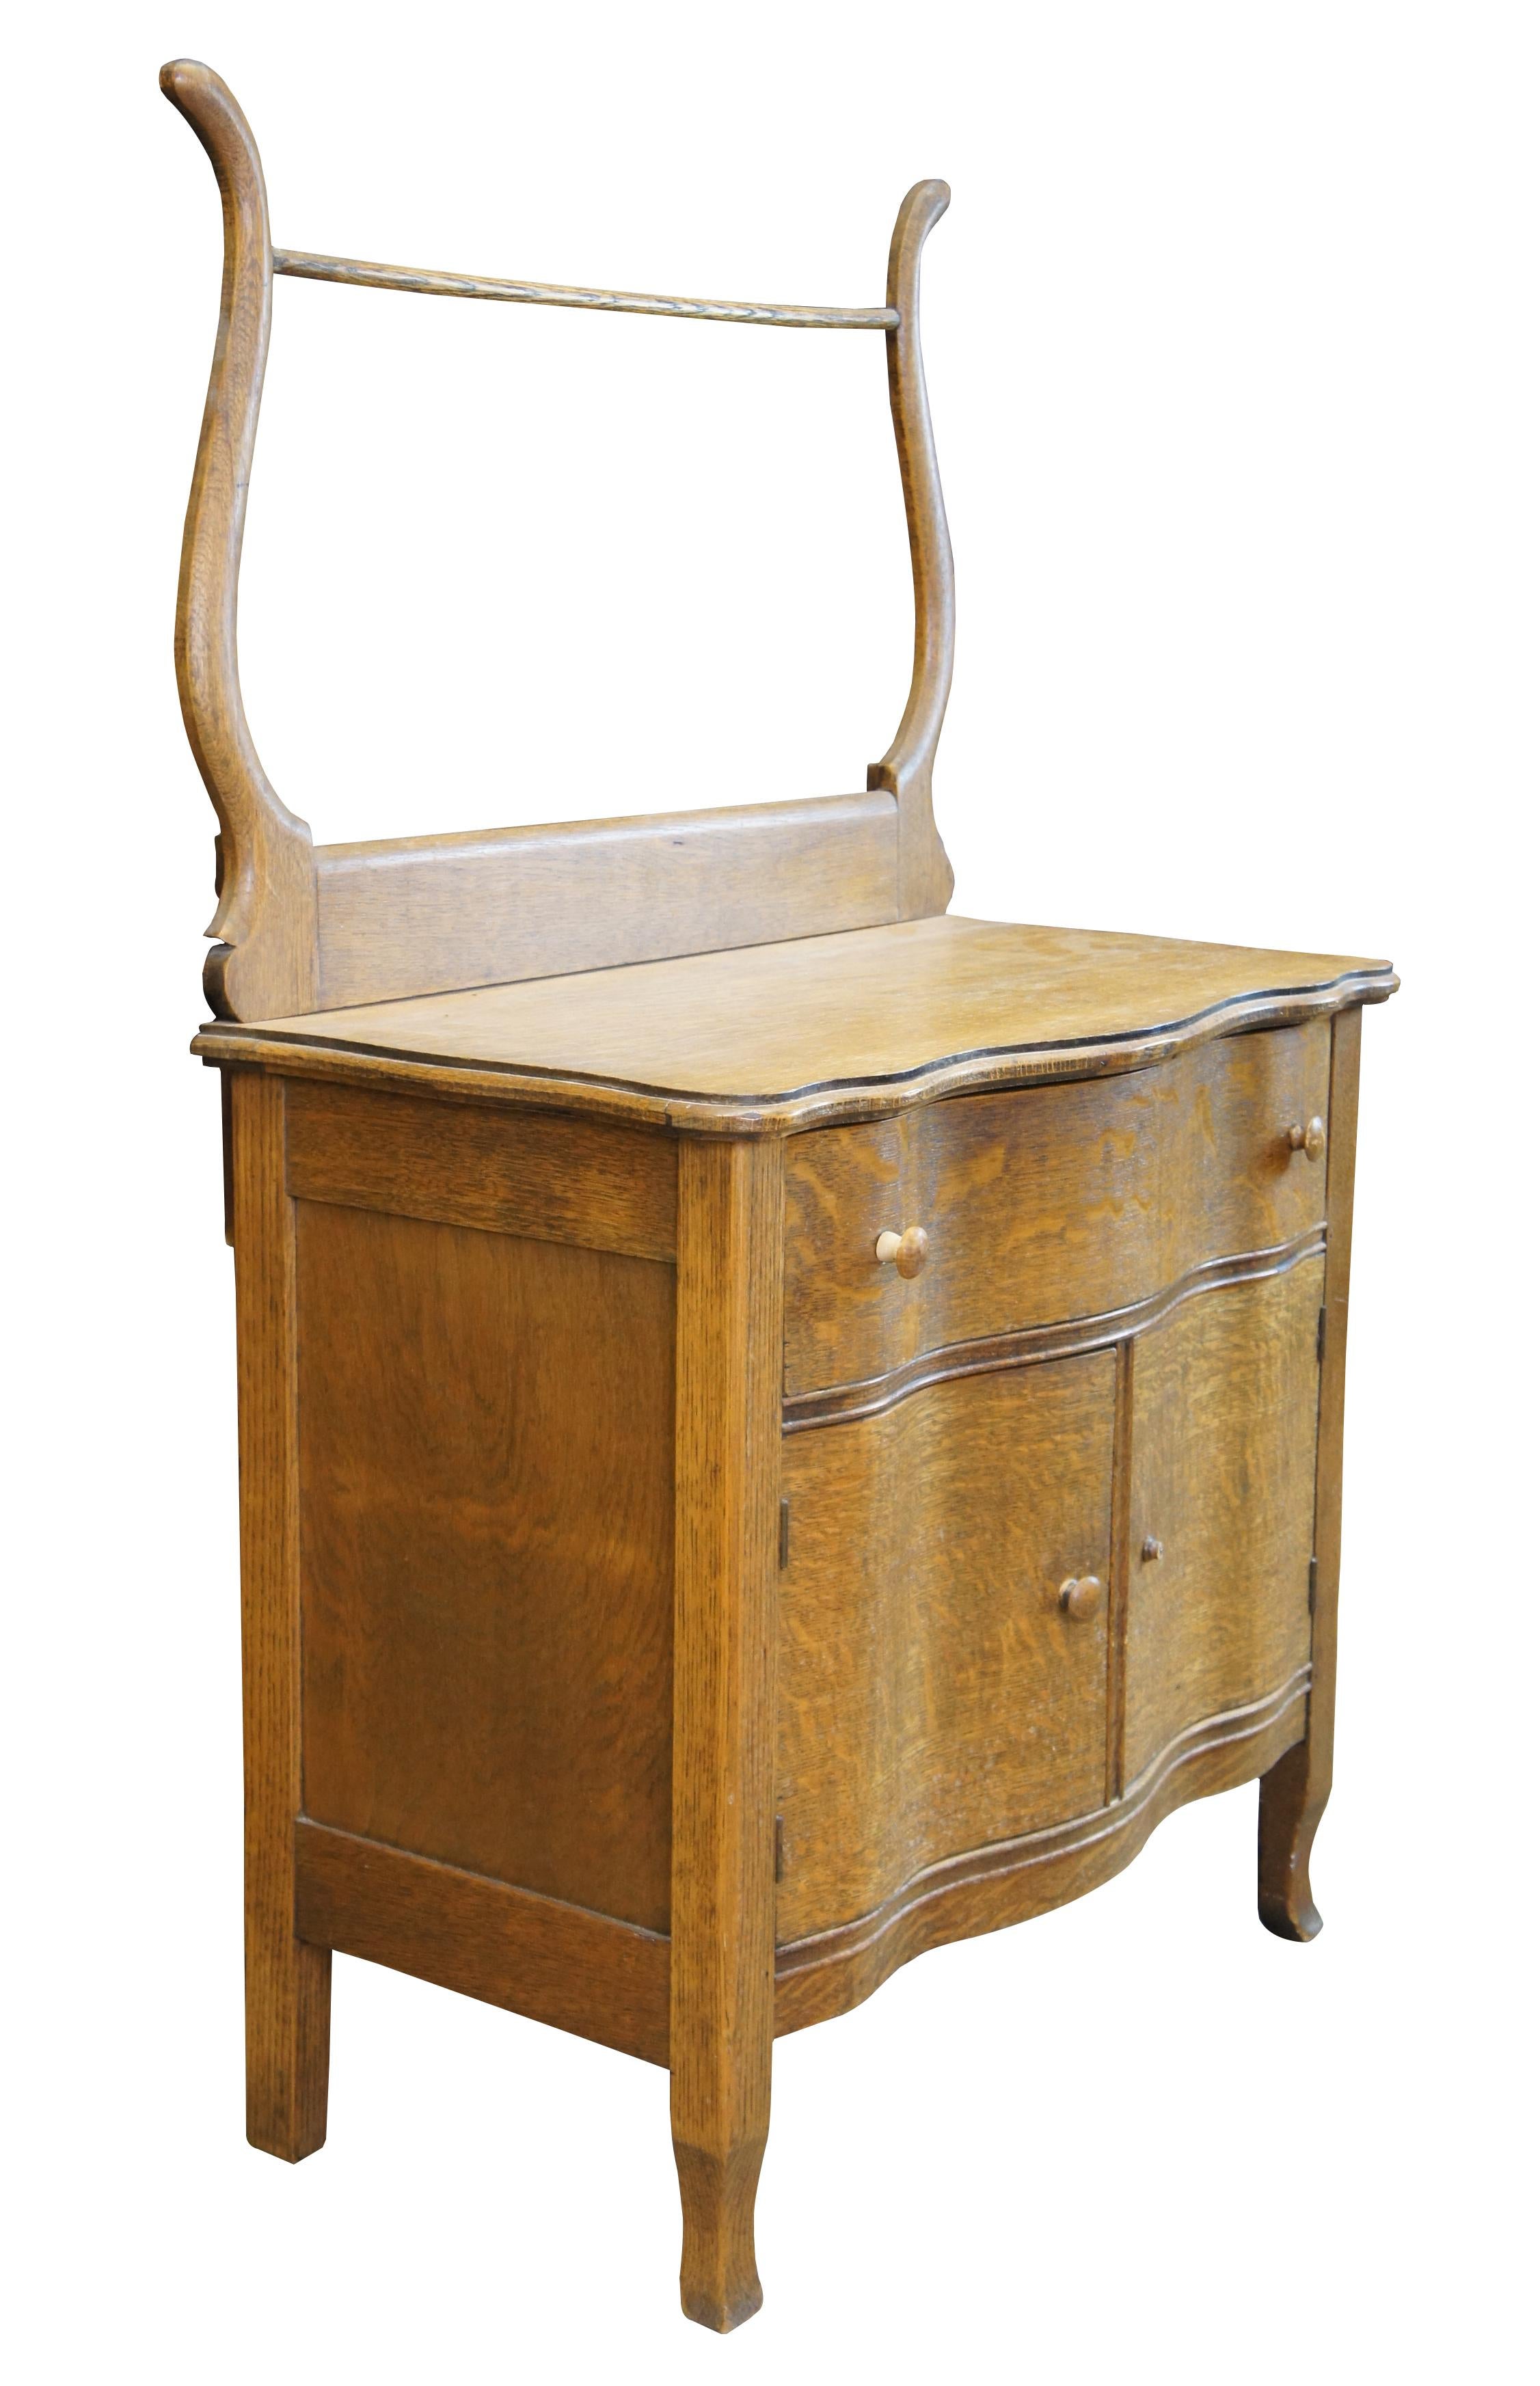 Antique early American wash stand, dry sink or commode. Made of quartersawn oak featuring serpentine form with lower cabinet, one drawer and upper towel bar.

Surface Height - 29